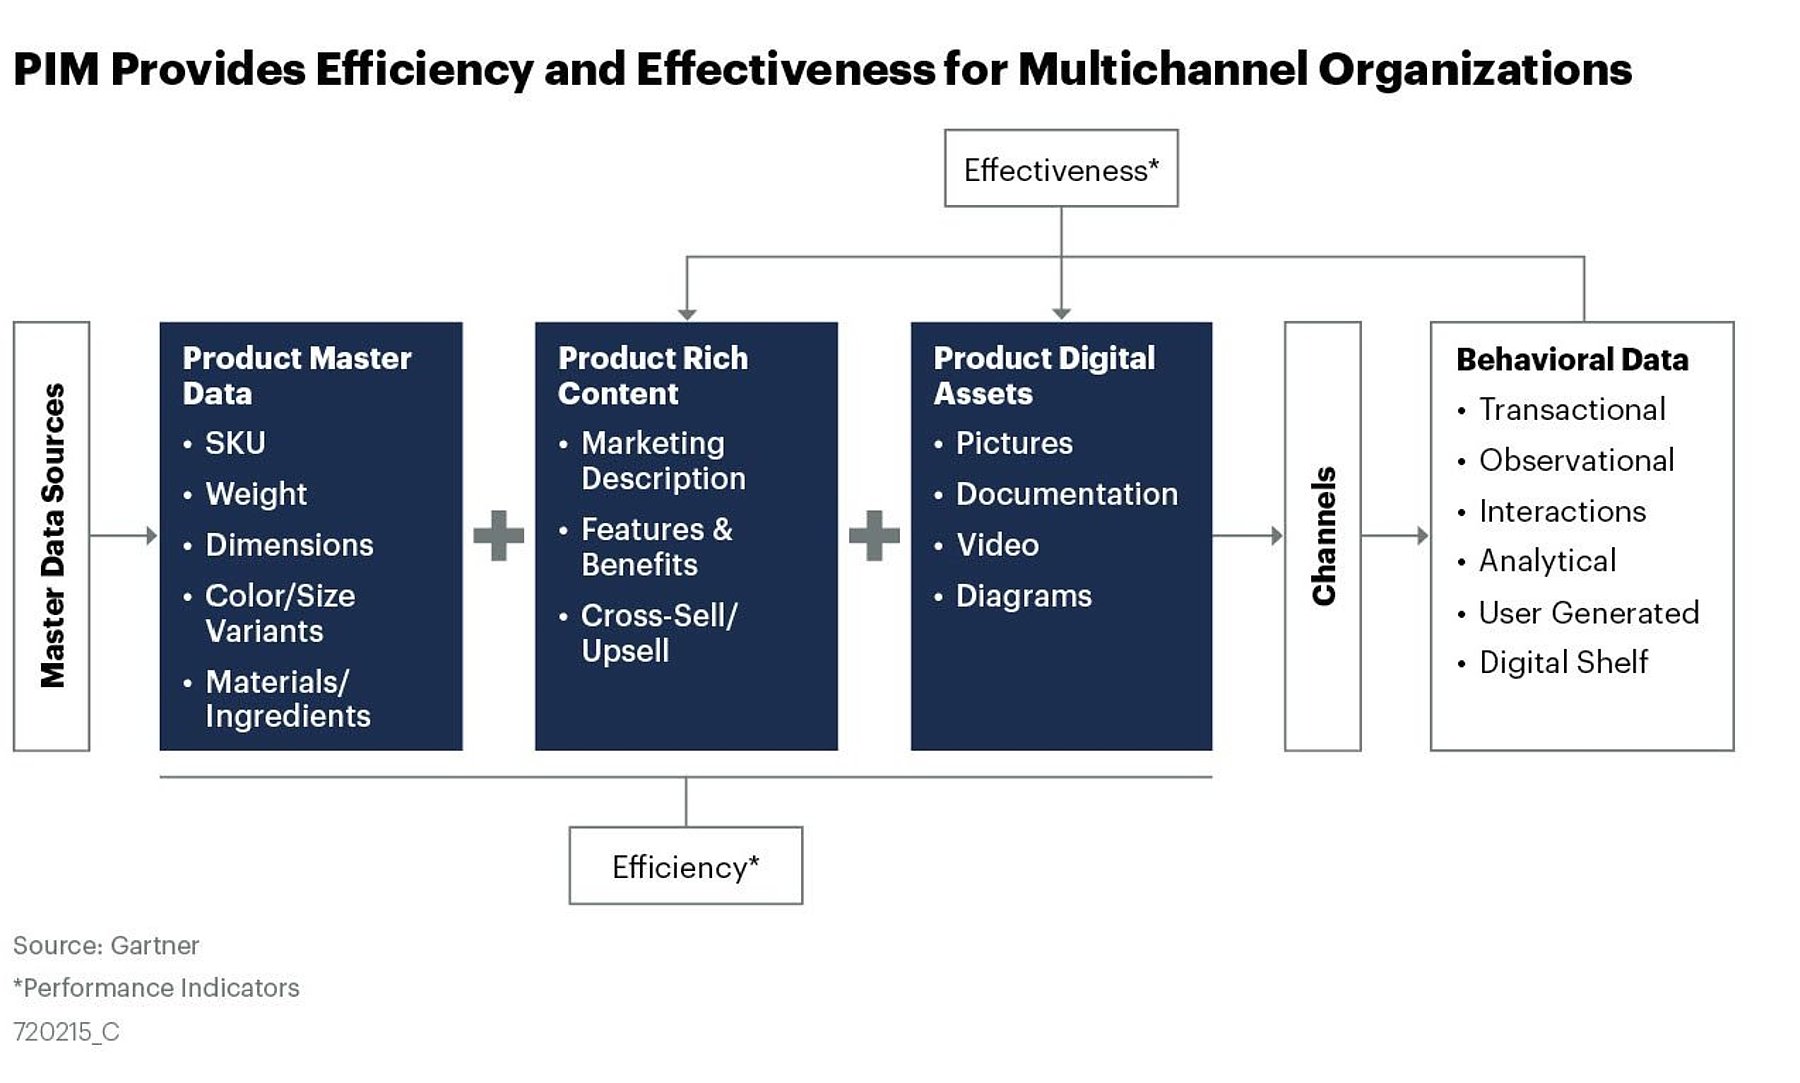 PIM Provides Efficiency and Effectiveness for Multichannel Organizations